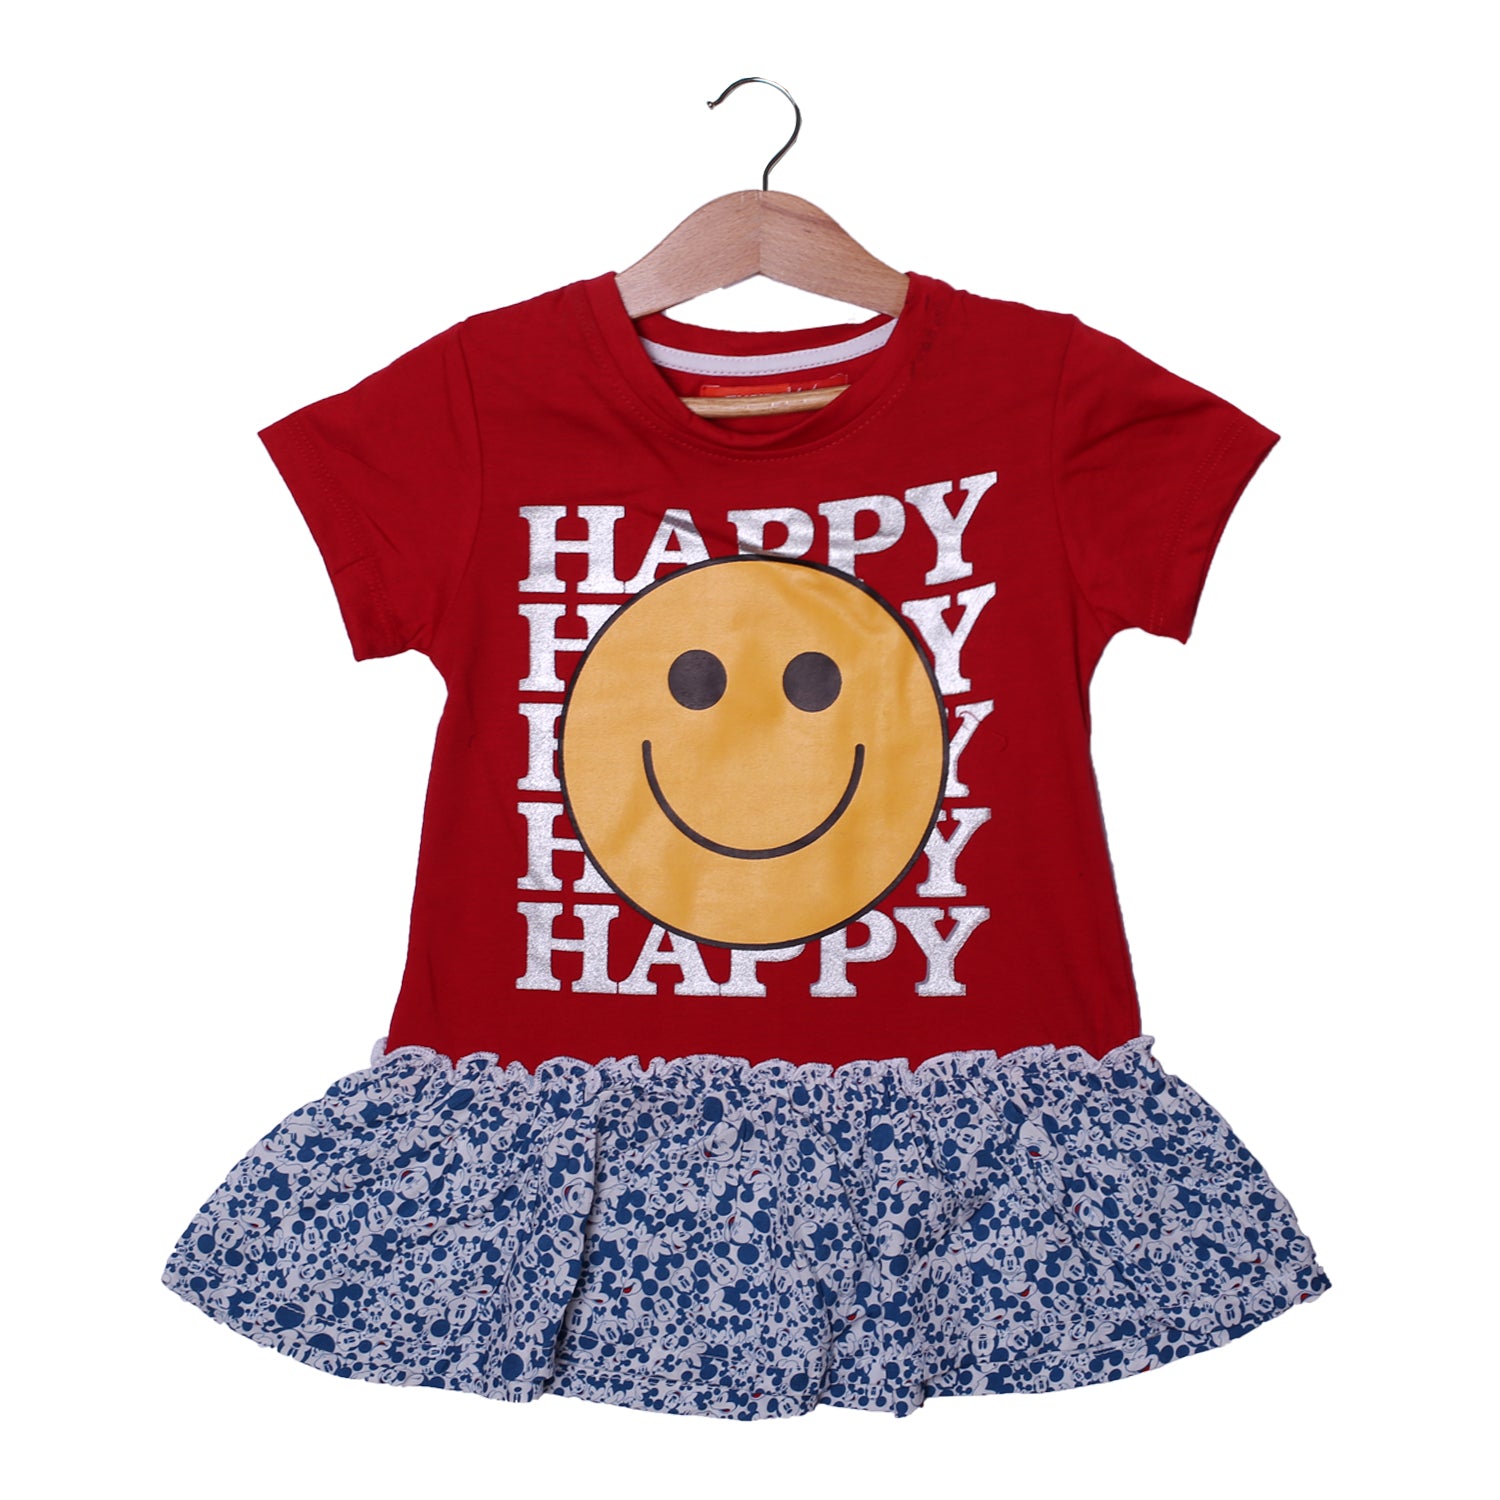 NEW RED HAPPY FACE EMOJI PRINTED TOP T-SHIRT FOR GIRLS